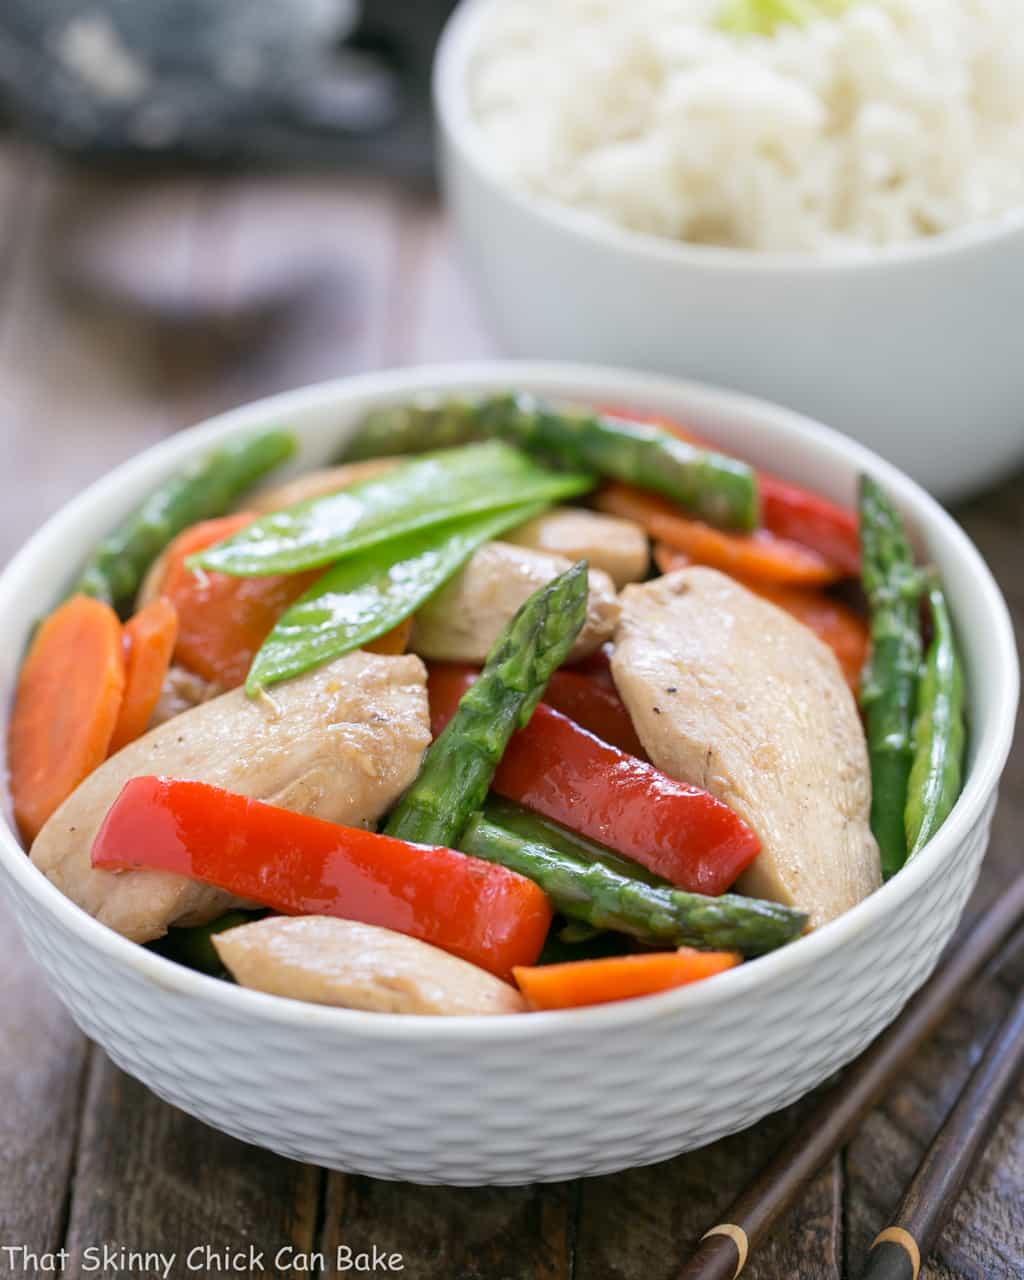 Chicken Stir Fry with Oyster Sauce